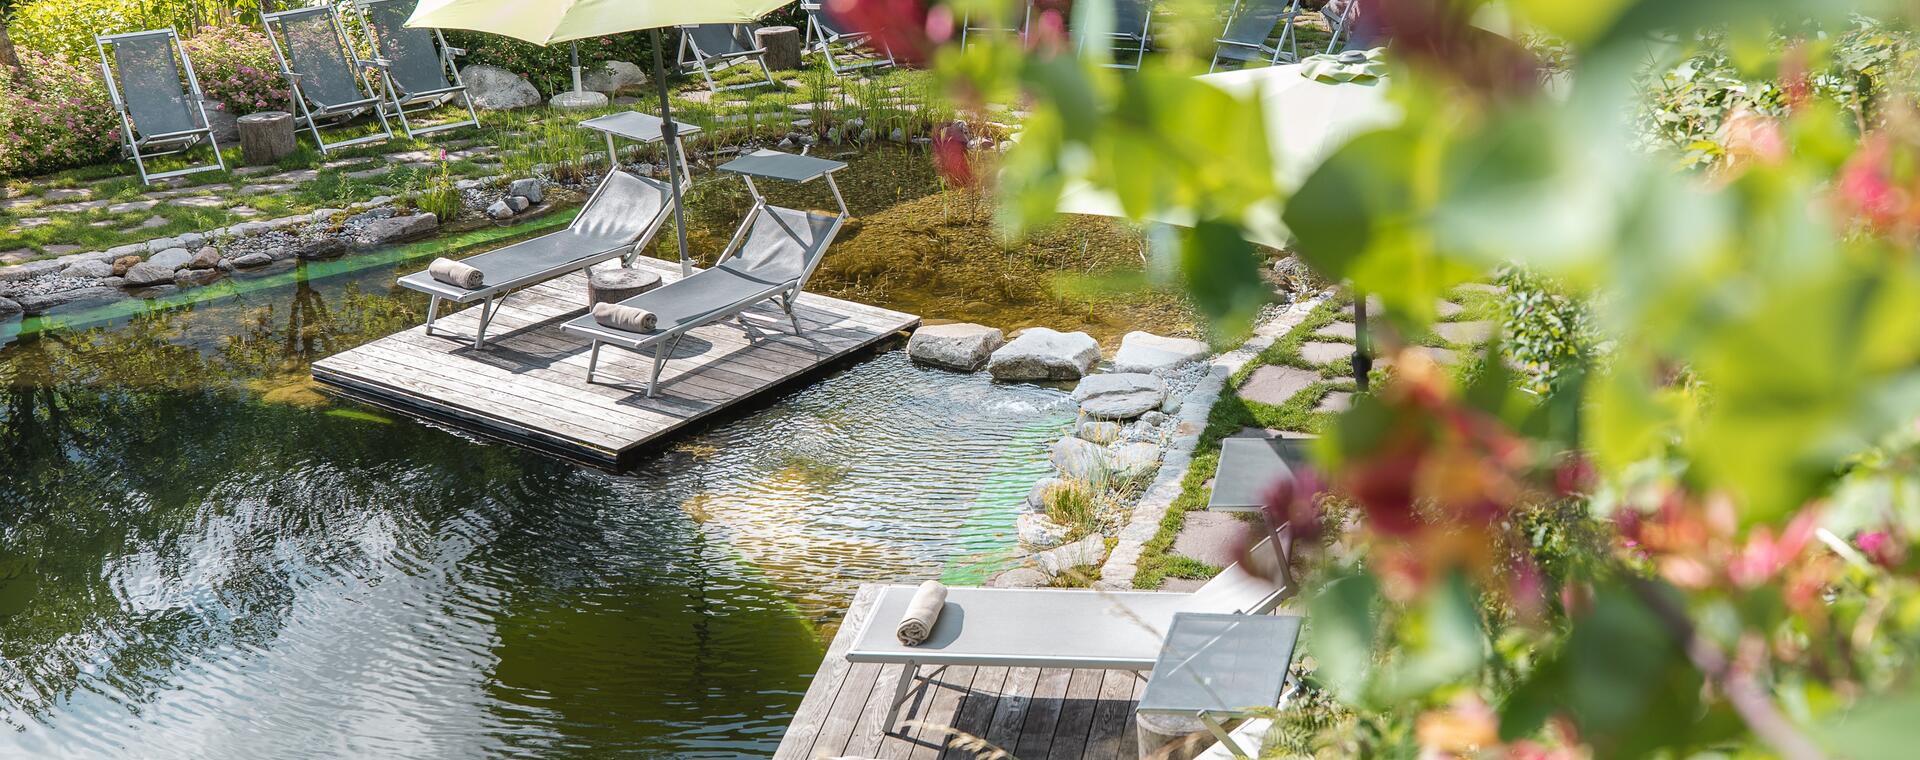 swimming pond garden hotel theresia in austria